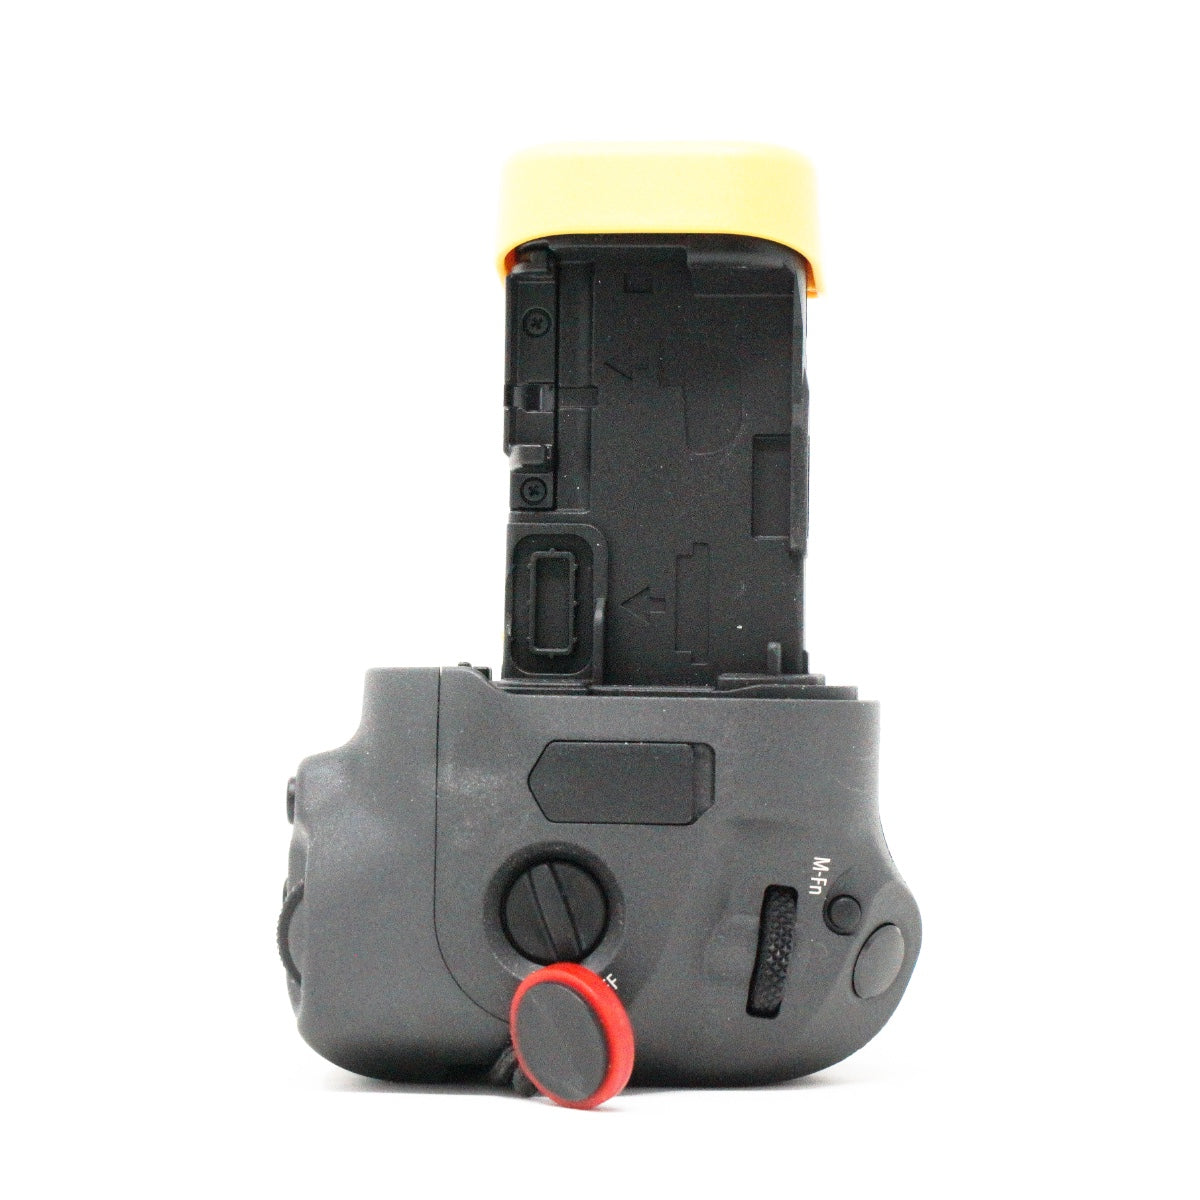 USED Canon BG-E22 Battery Grip for the Canon EOS R